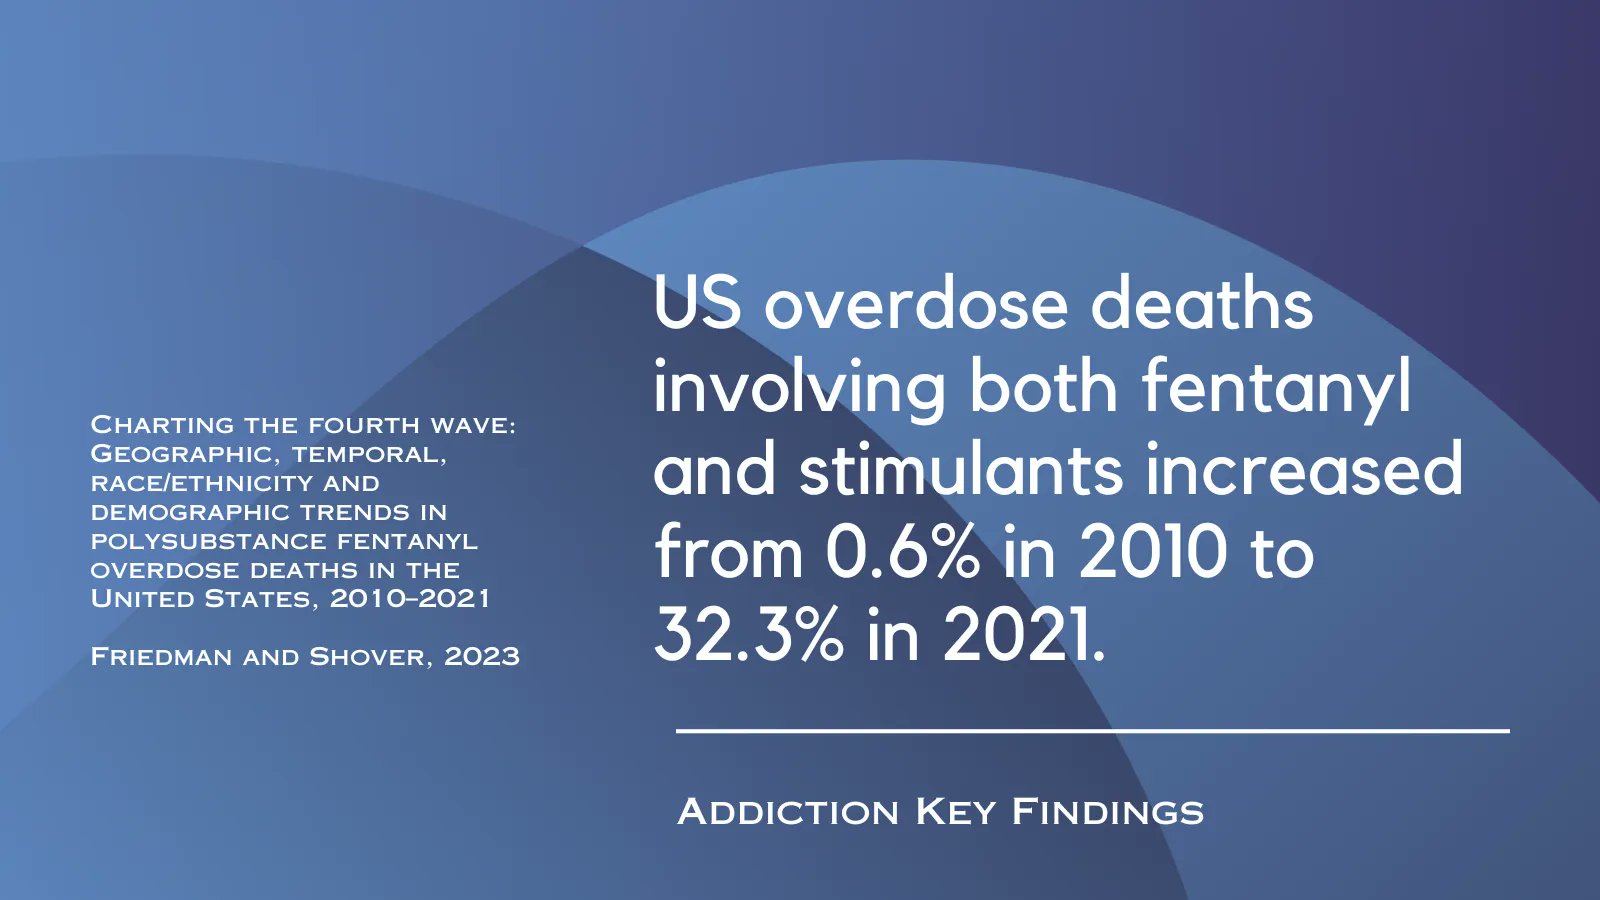 Fentanyl plus stimulants drives 'fourth wave' of overdose epidemic in the  U.S.